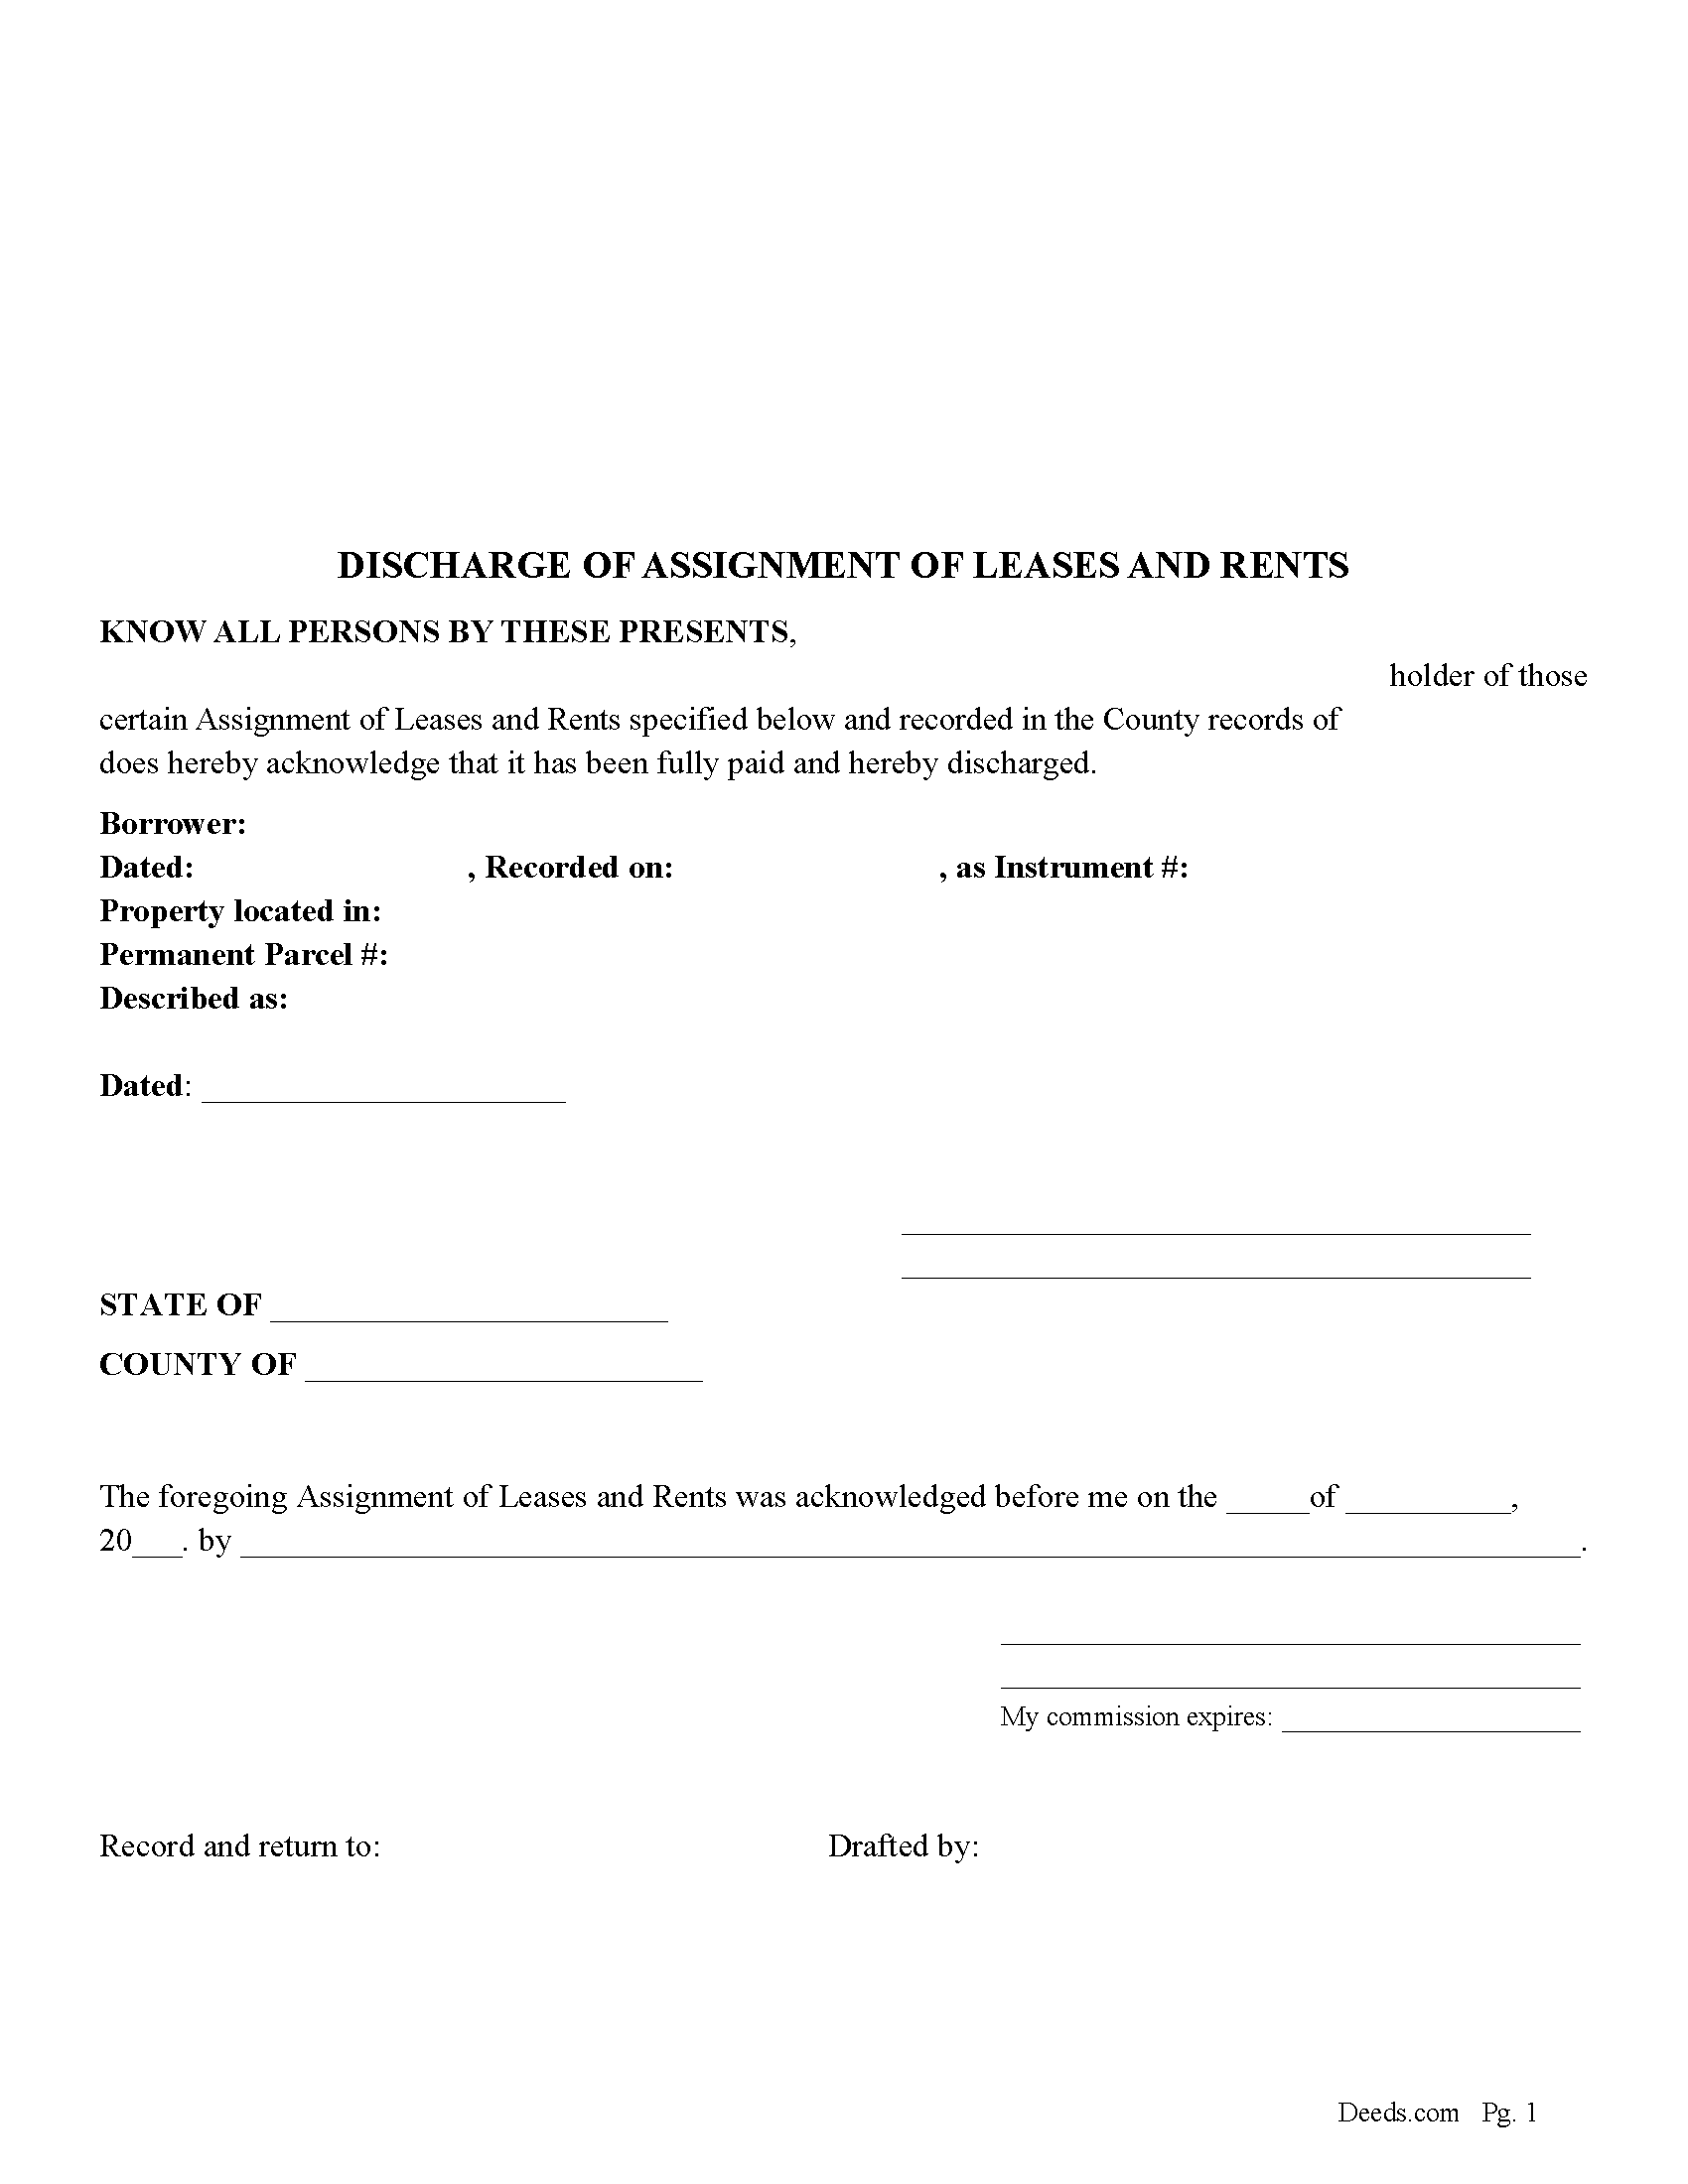 Michigan Discharge of Assignment of Leases and Rents Image